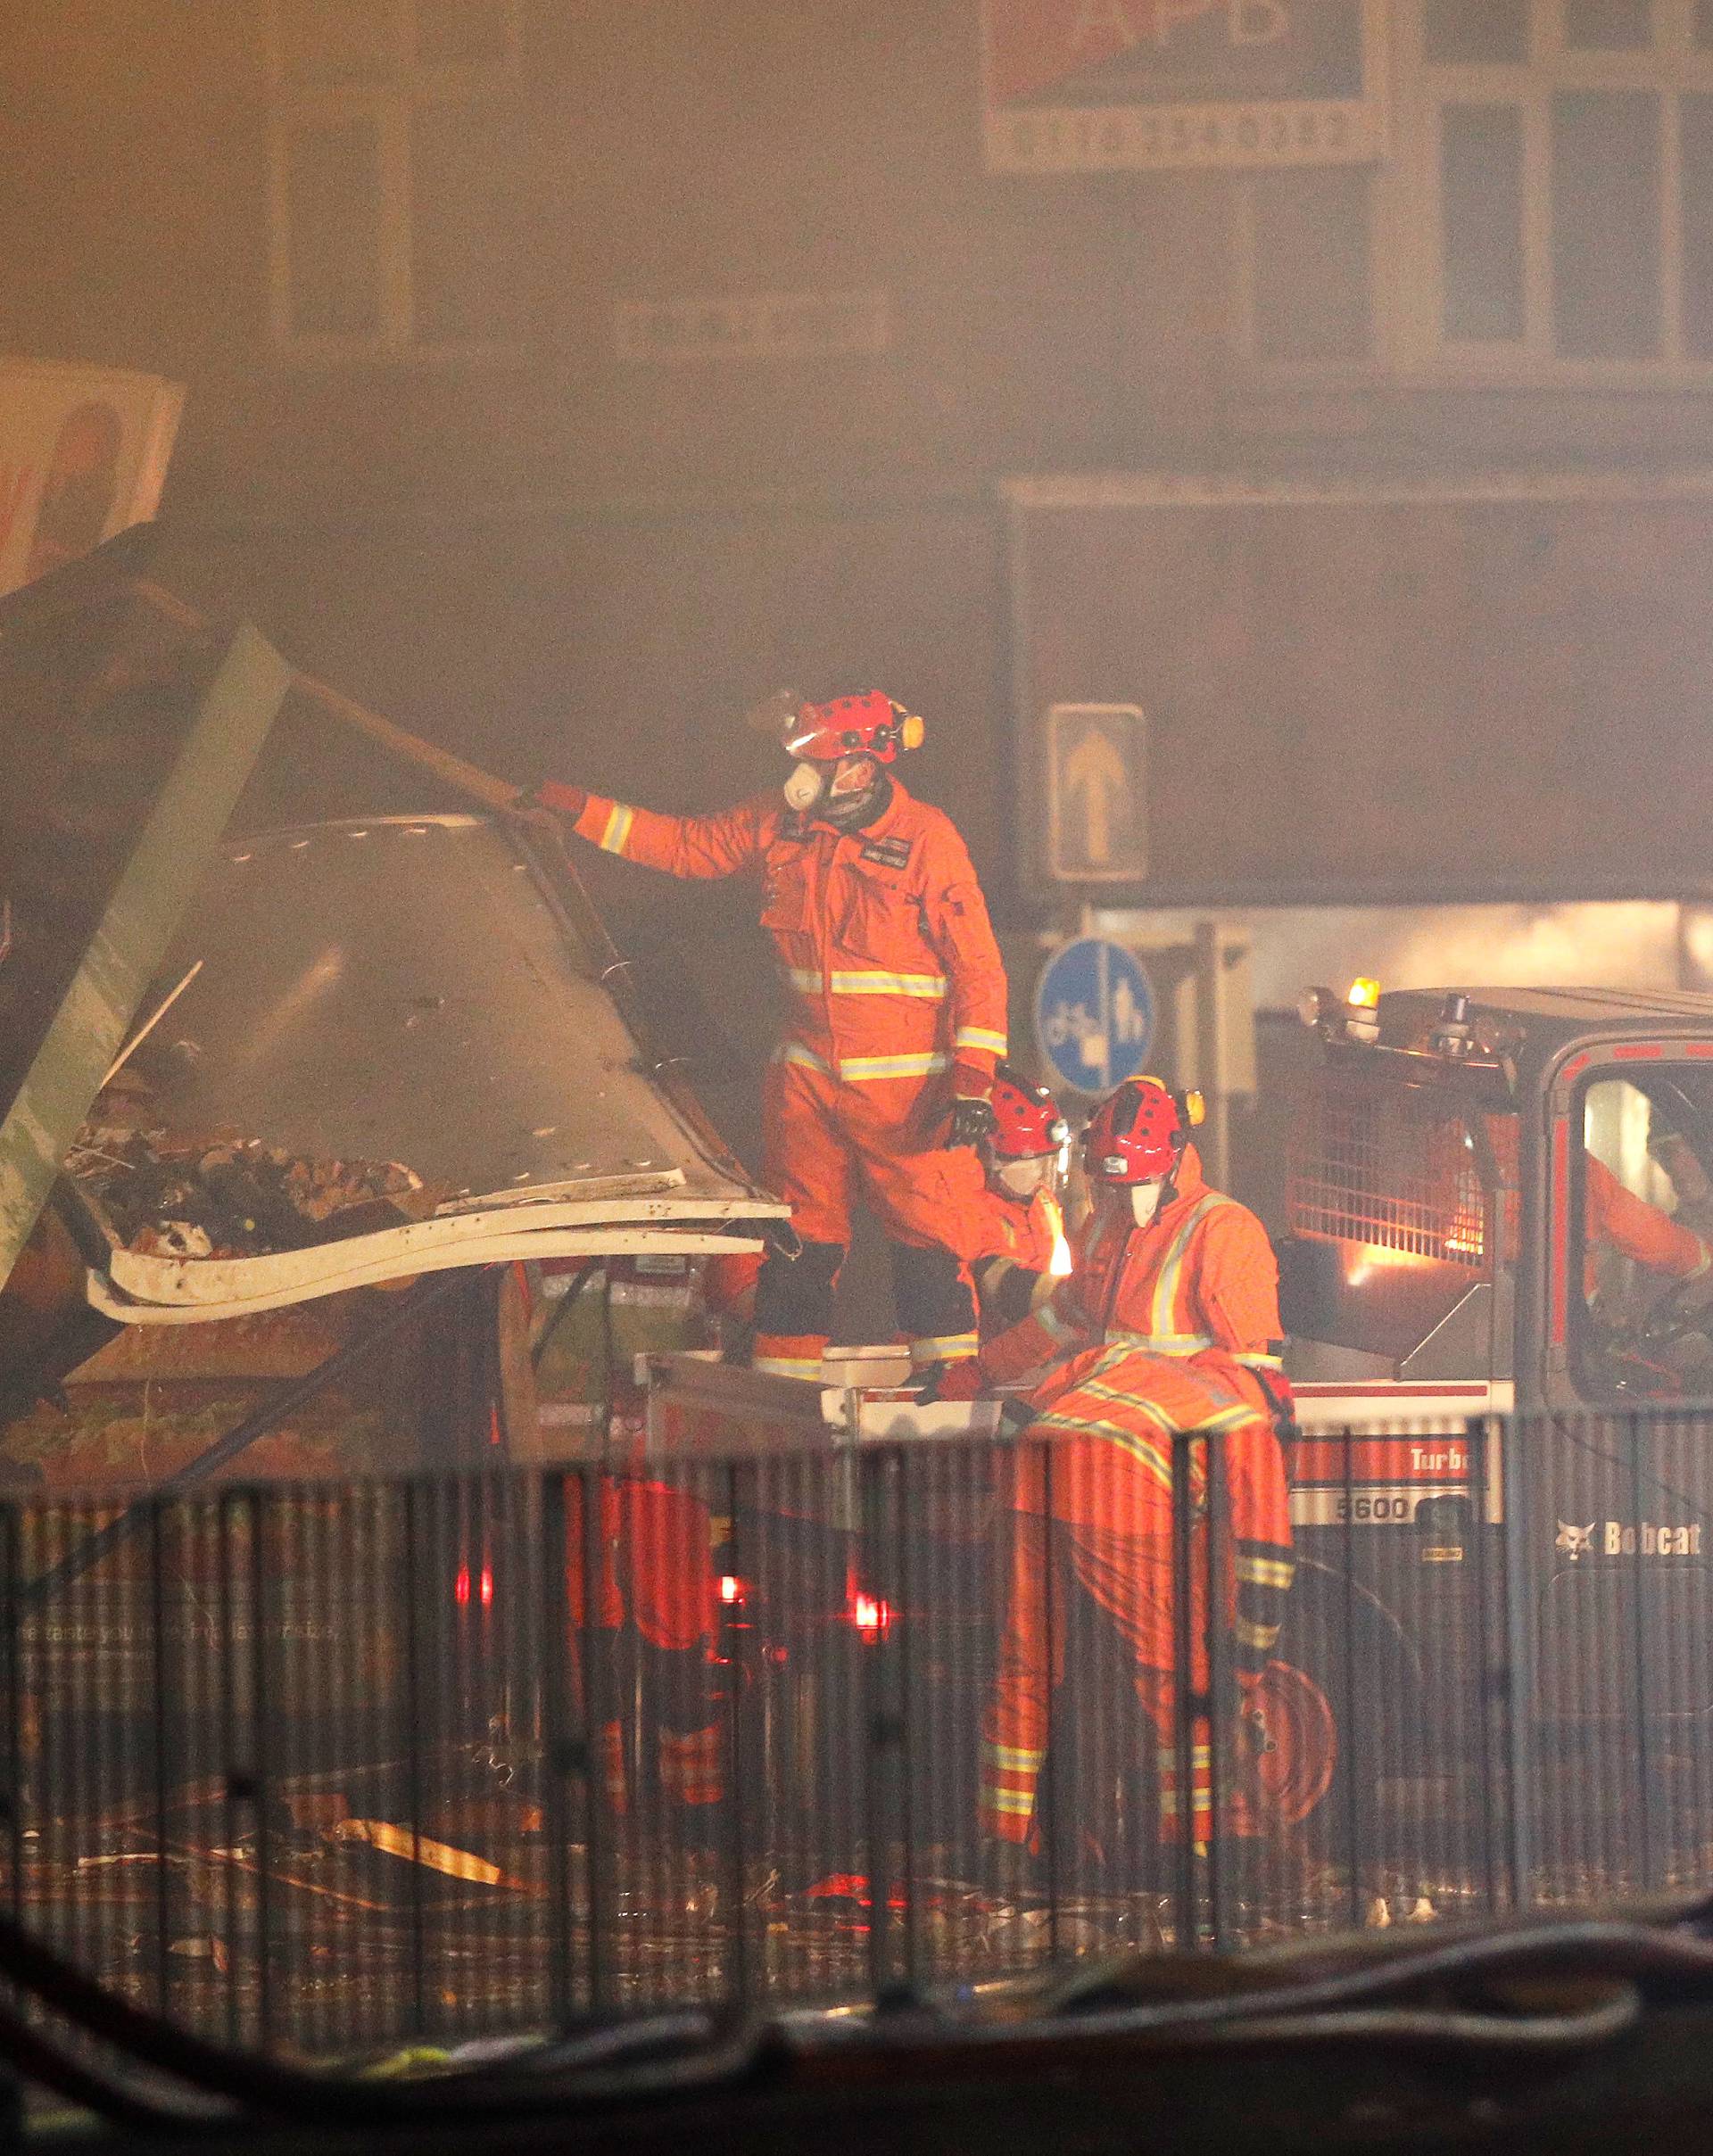 Members of the emergency services work at the site of an explosion which destroyed a convenience store and a home in Leicester